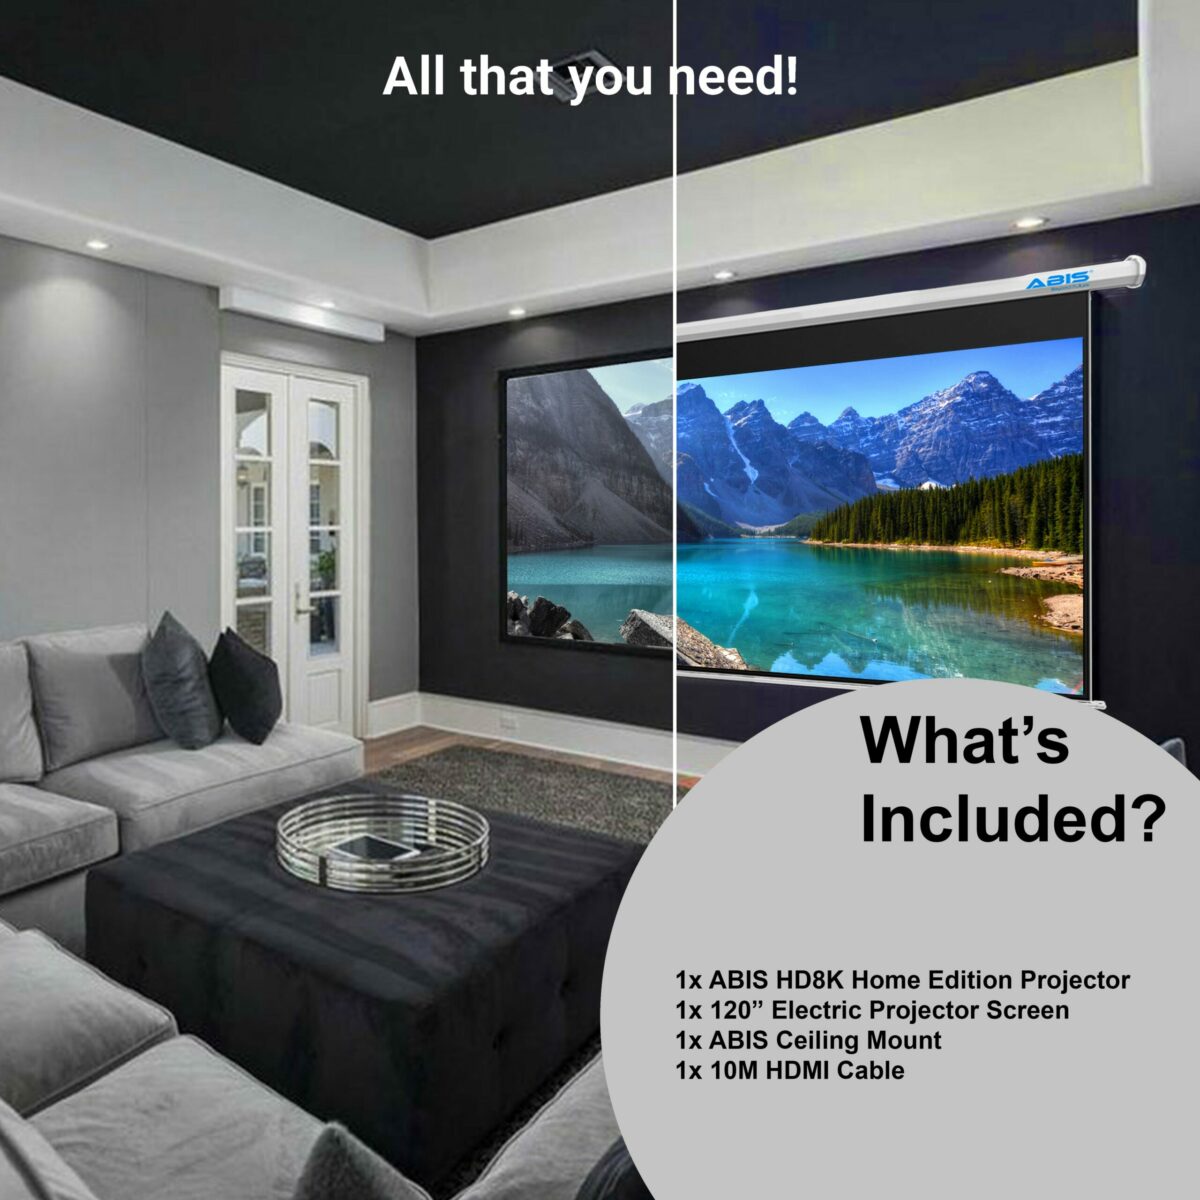 120" Electric Projector Screen & Projector Bundle with Android TV Stick for Home - Complete Set - ABIS